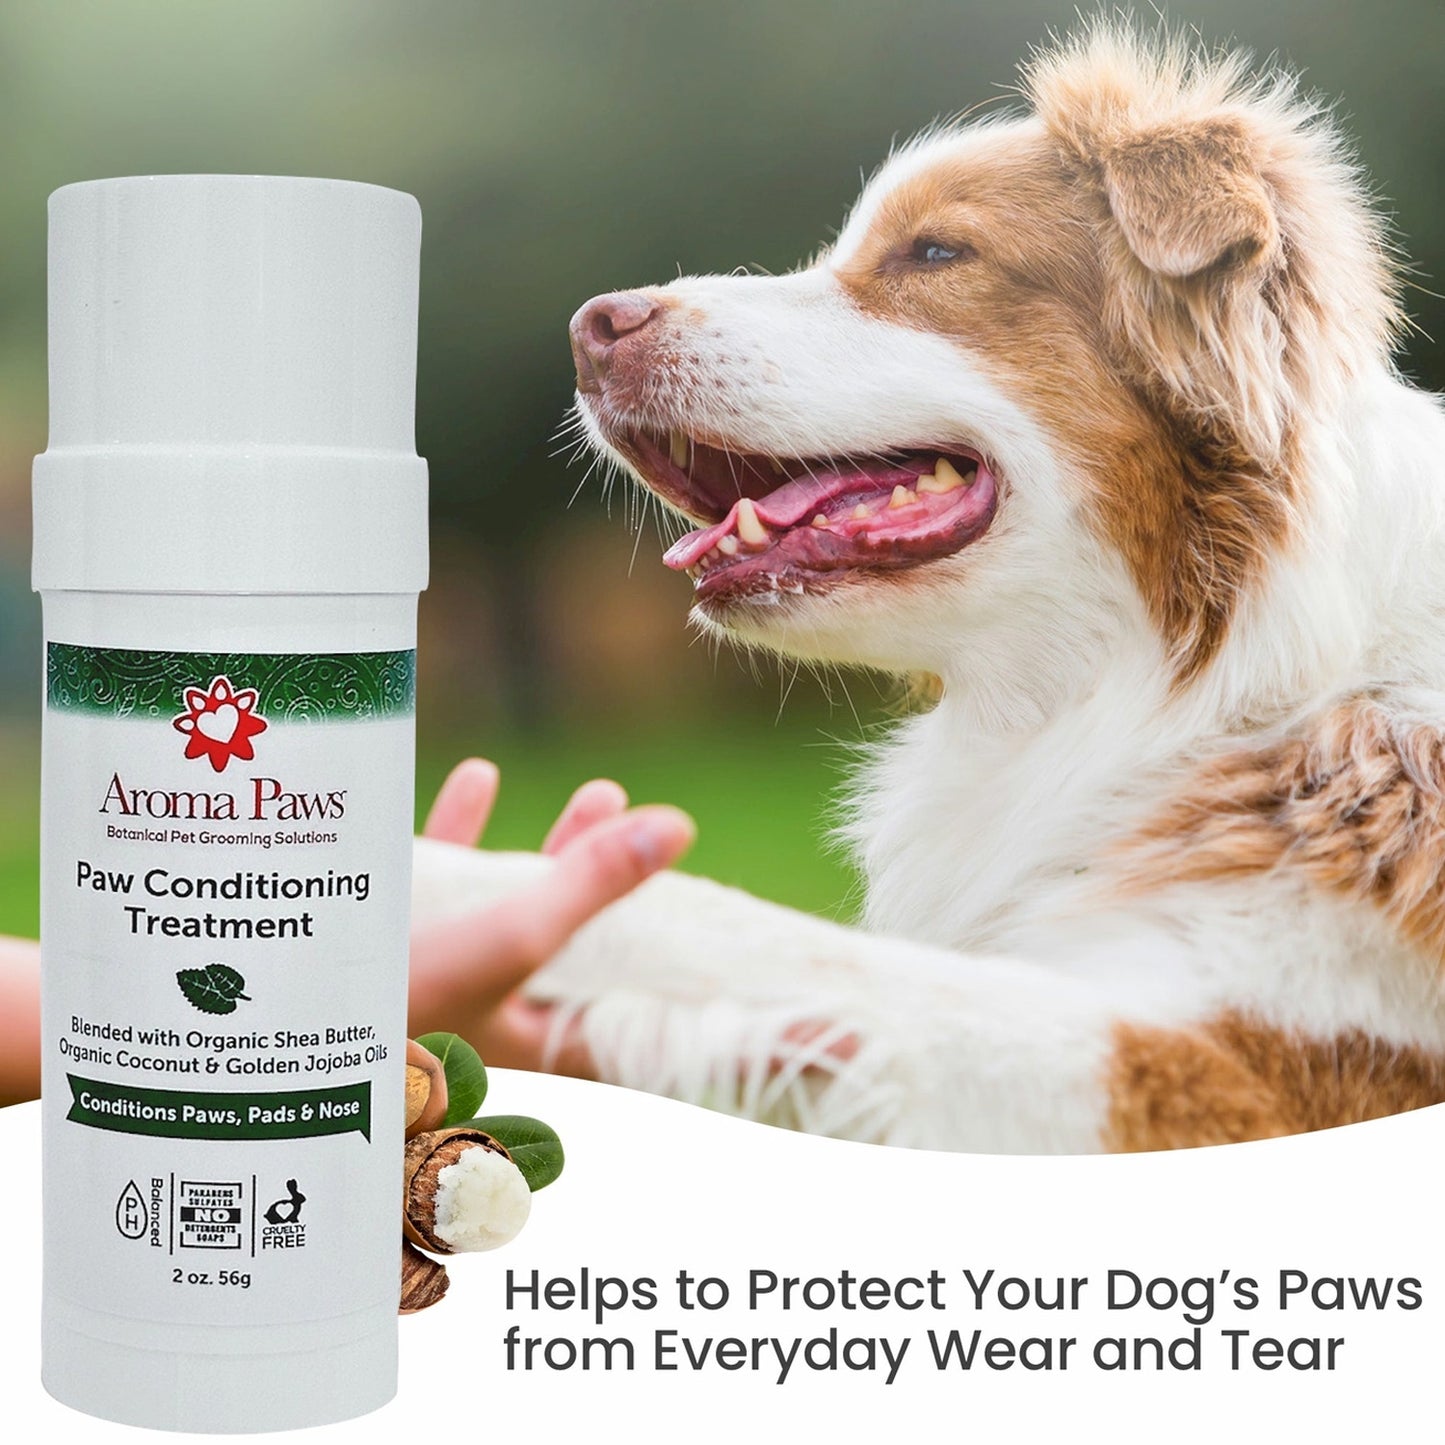 Aroma Paws Roll On Paw Conditioning Treatment 2 oz.